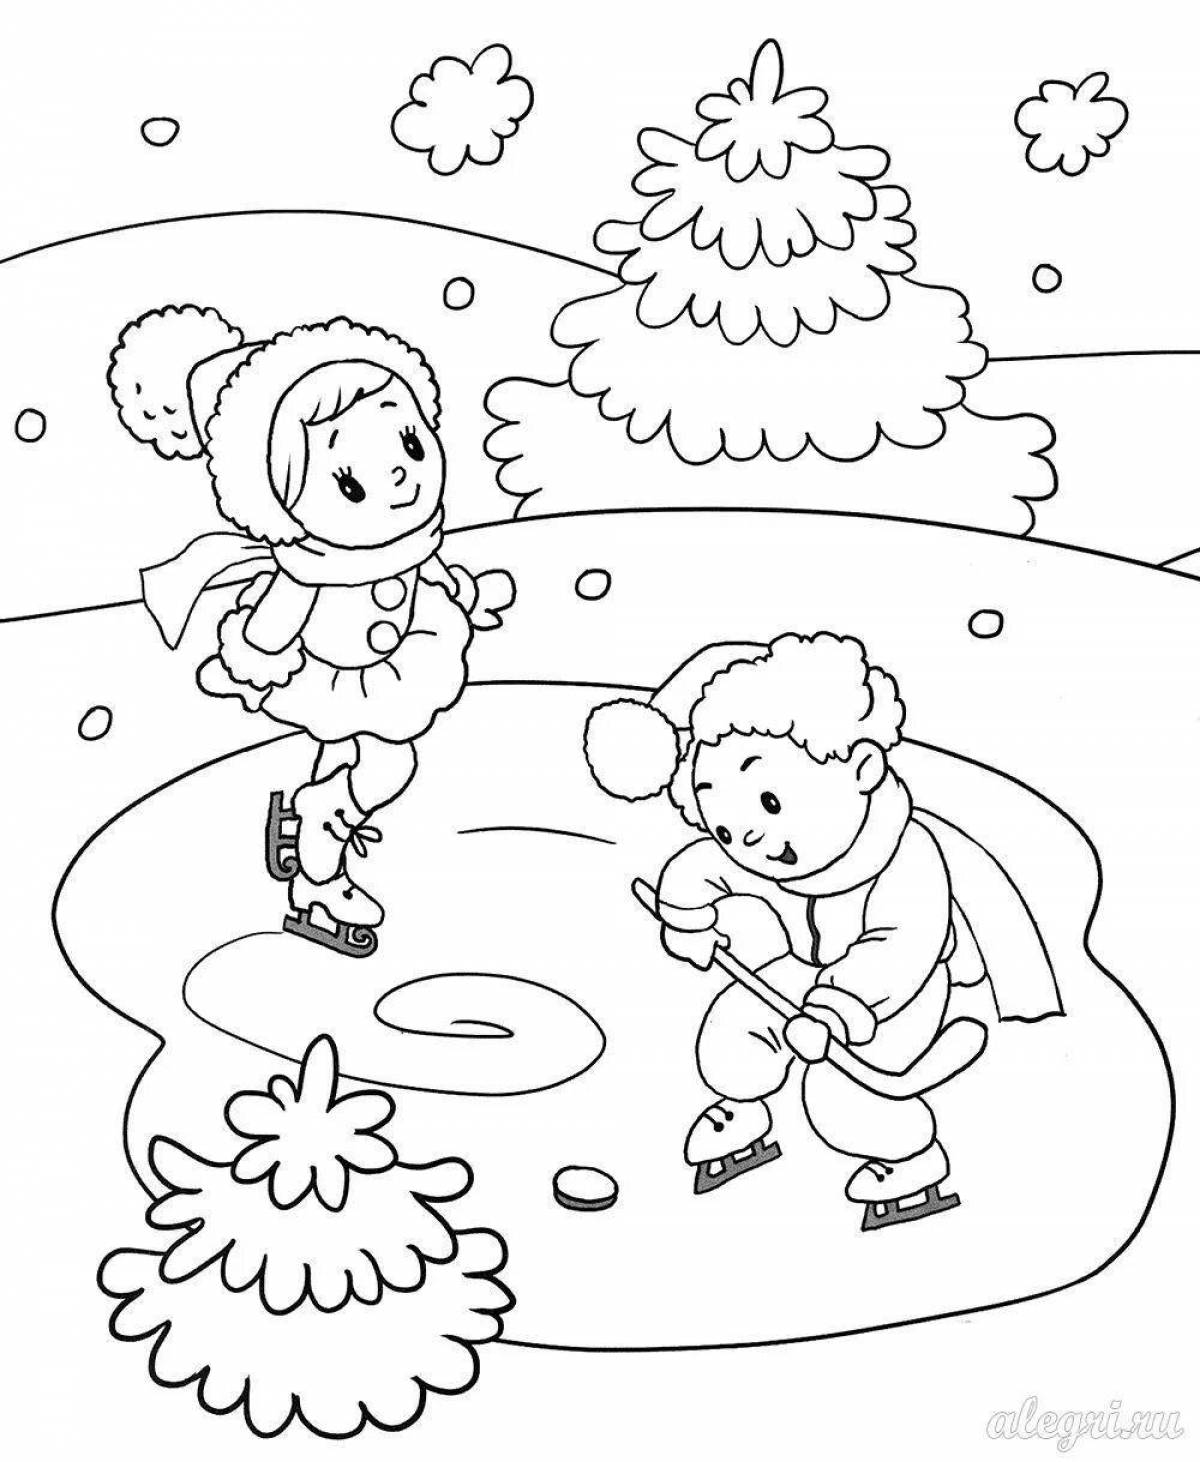 A fun winter coloring book for high school students